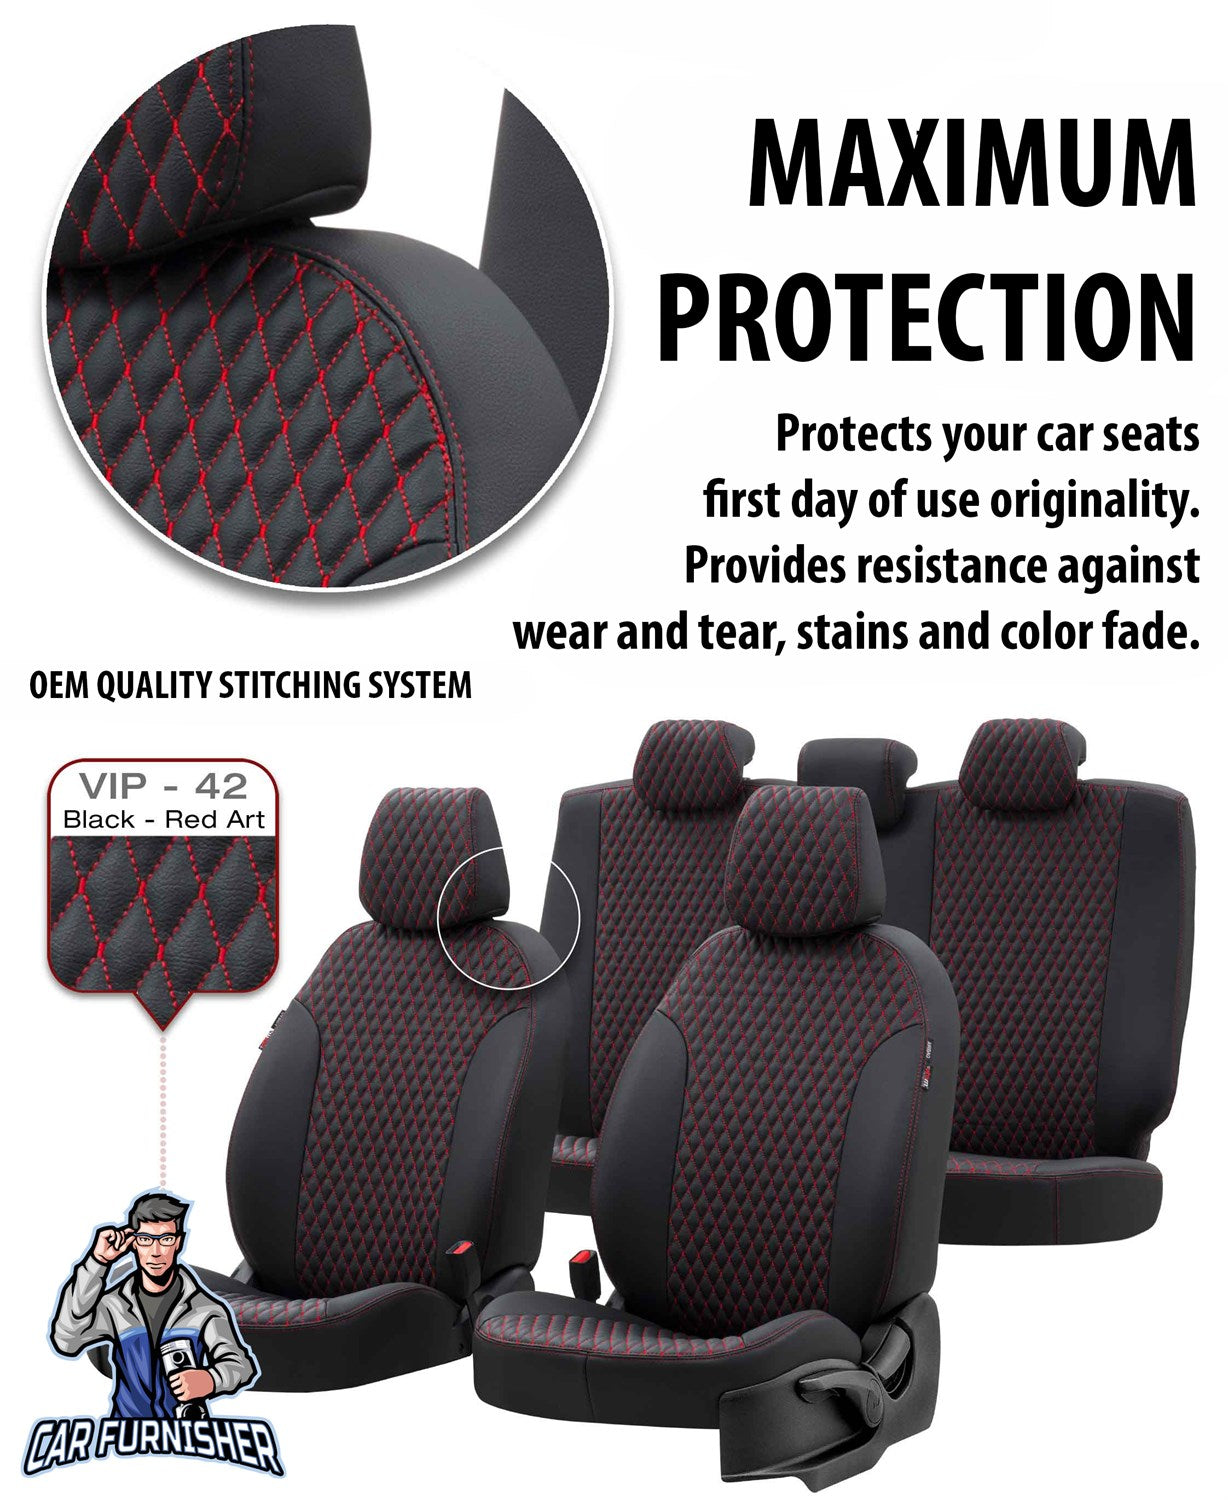 Geely Emgrand Seat Covers Amsterdam Leather Design Smoked Black Leather